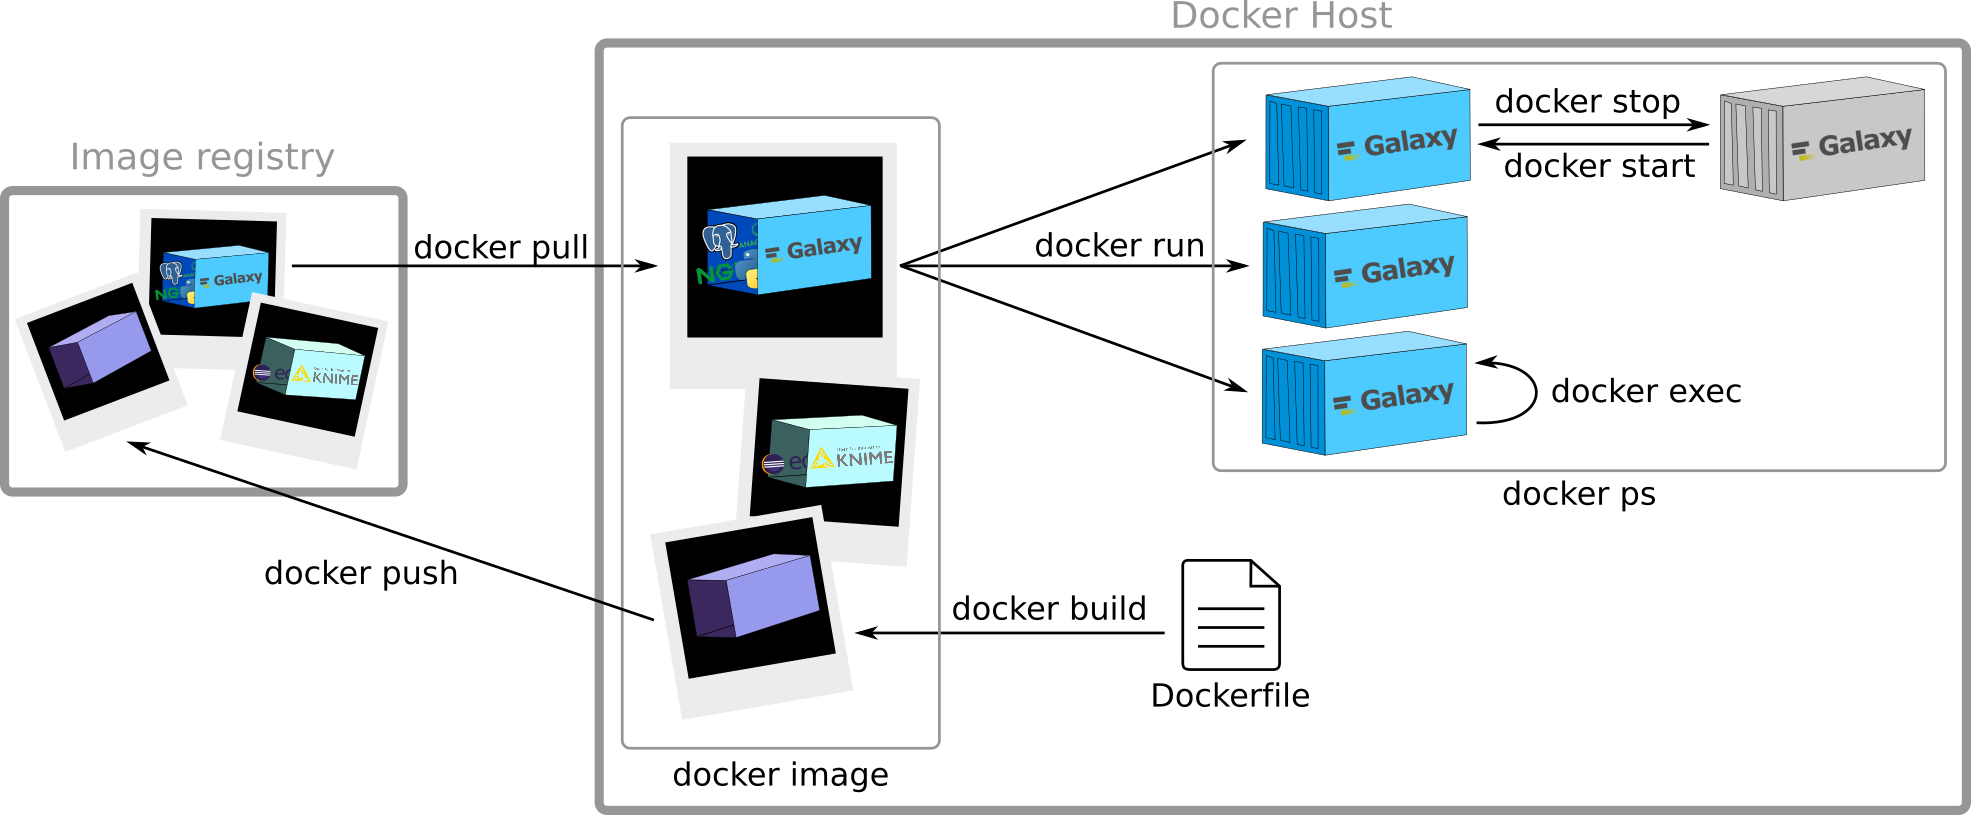 Docker push is shown pushing the locally built container to the image registry.